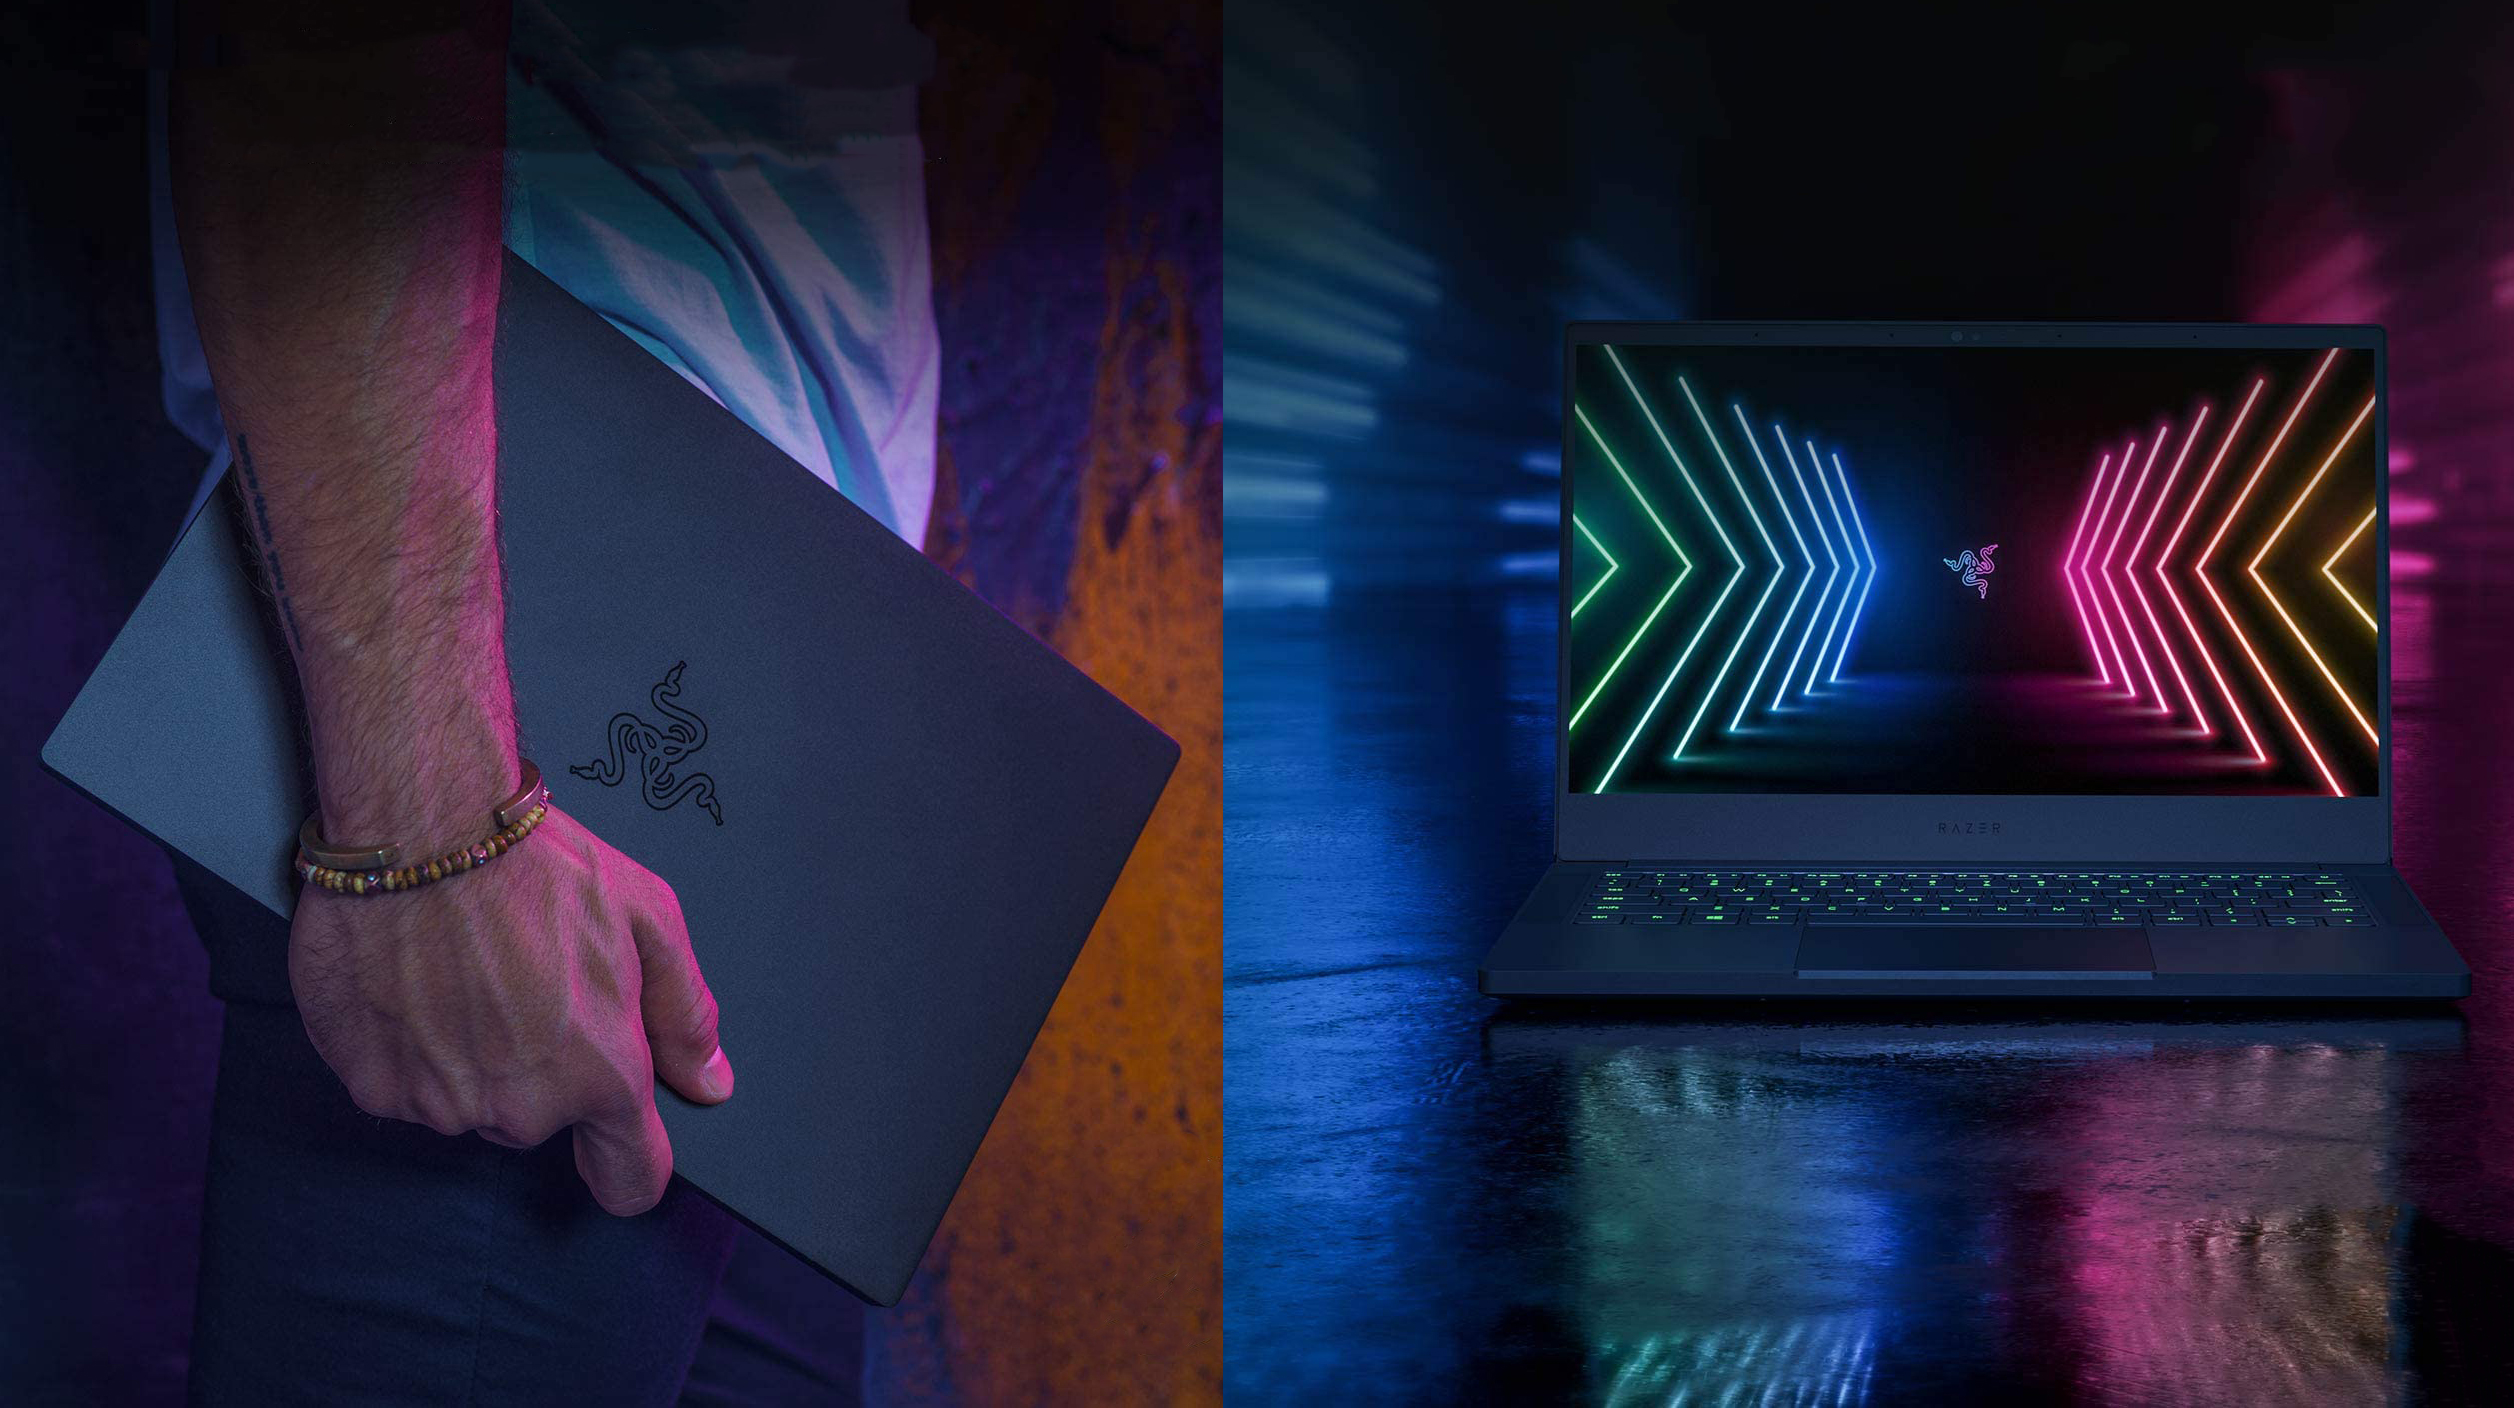 Amazon's Daily Deals discount several Razer and Corsair products